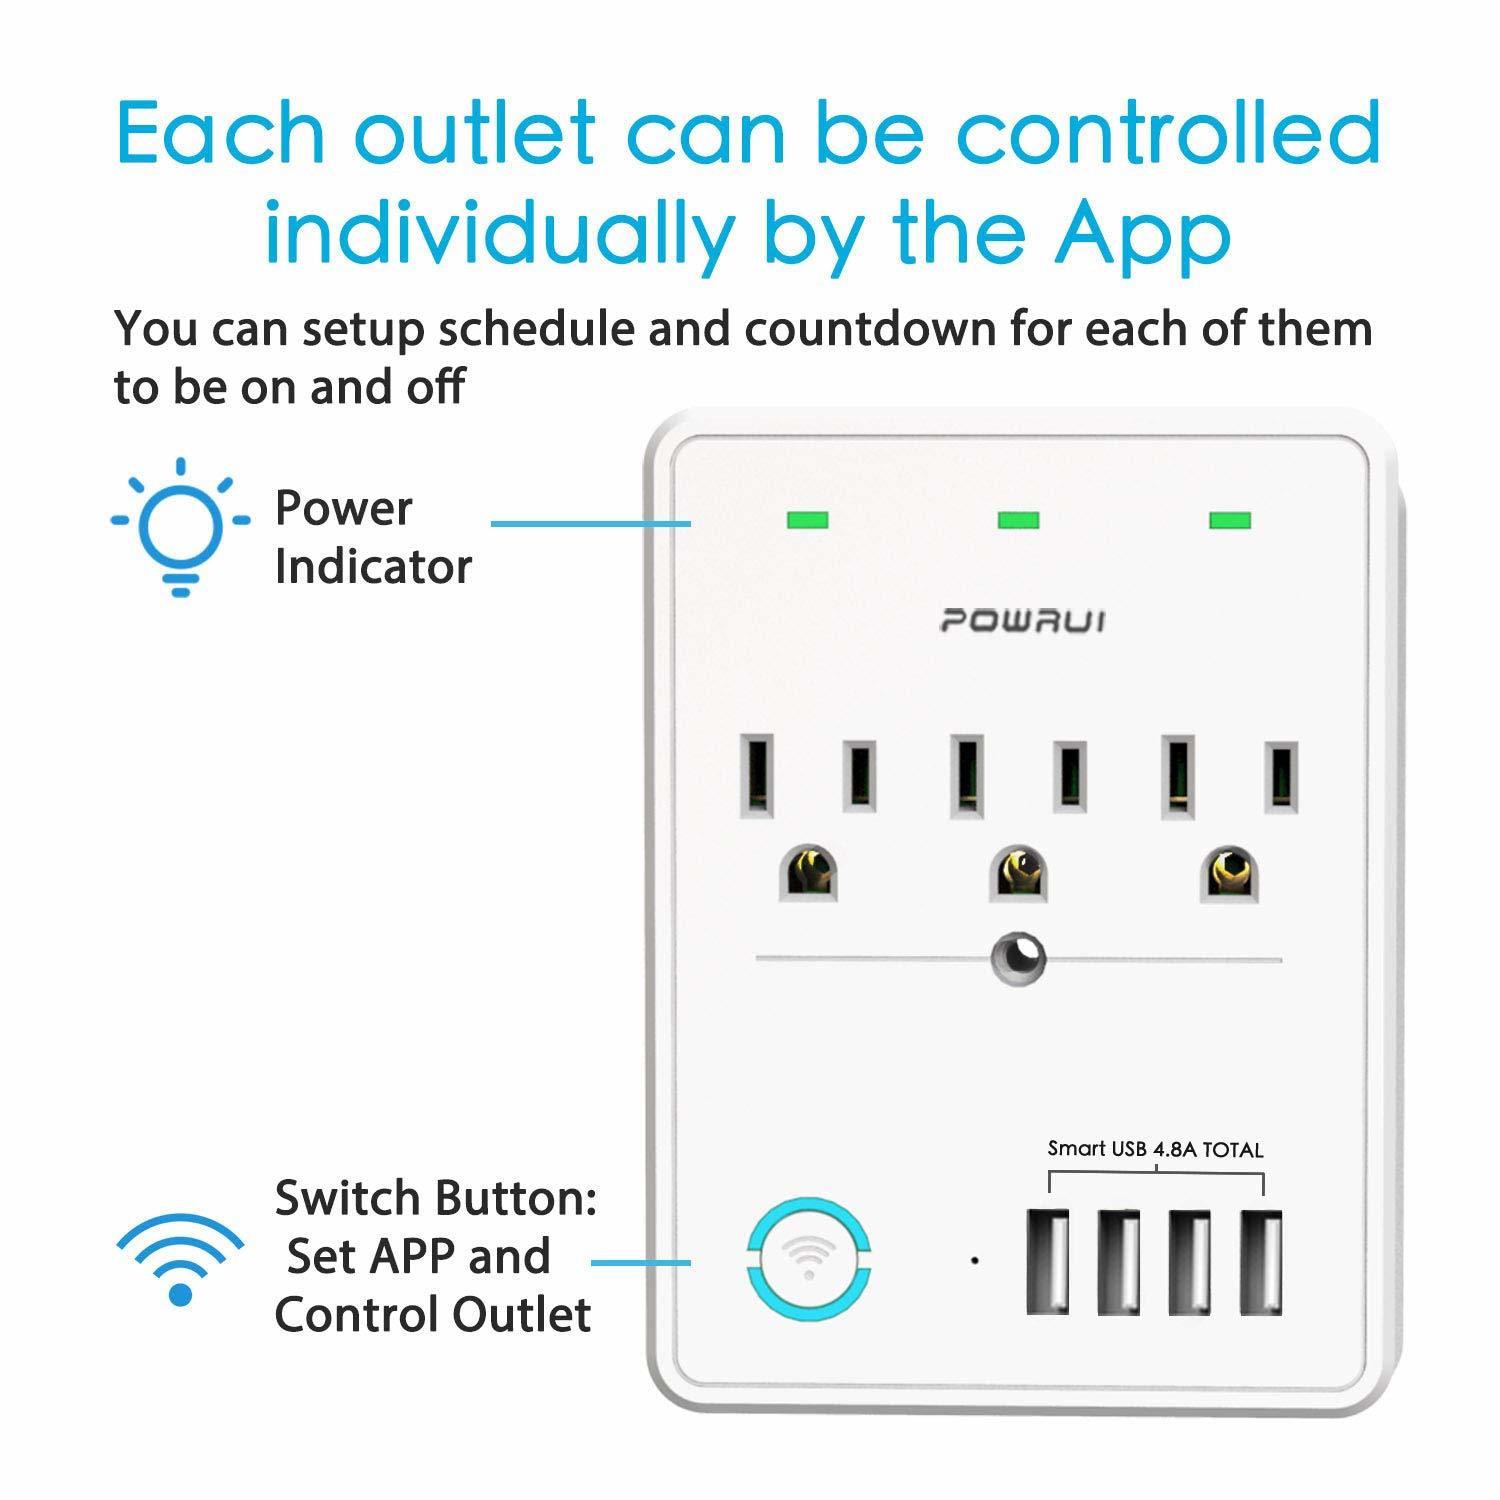 Smart Plug (2 Points Only), Usb Wall and 50 similar items